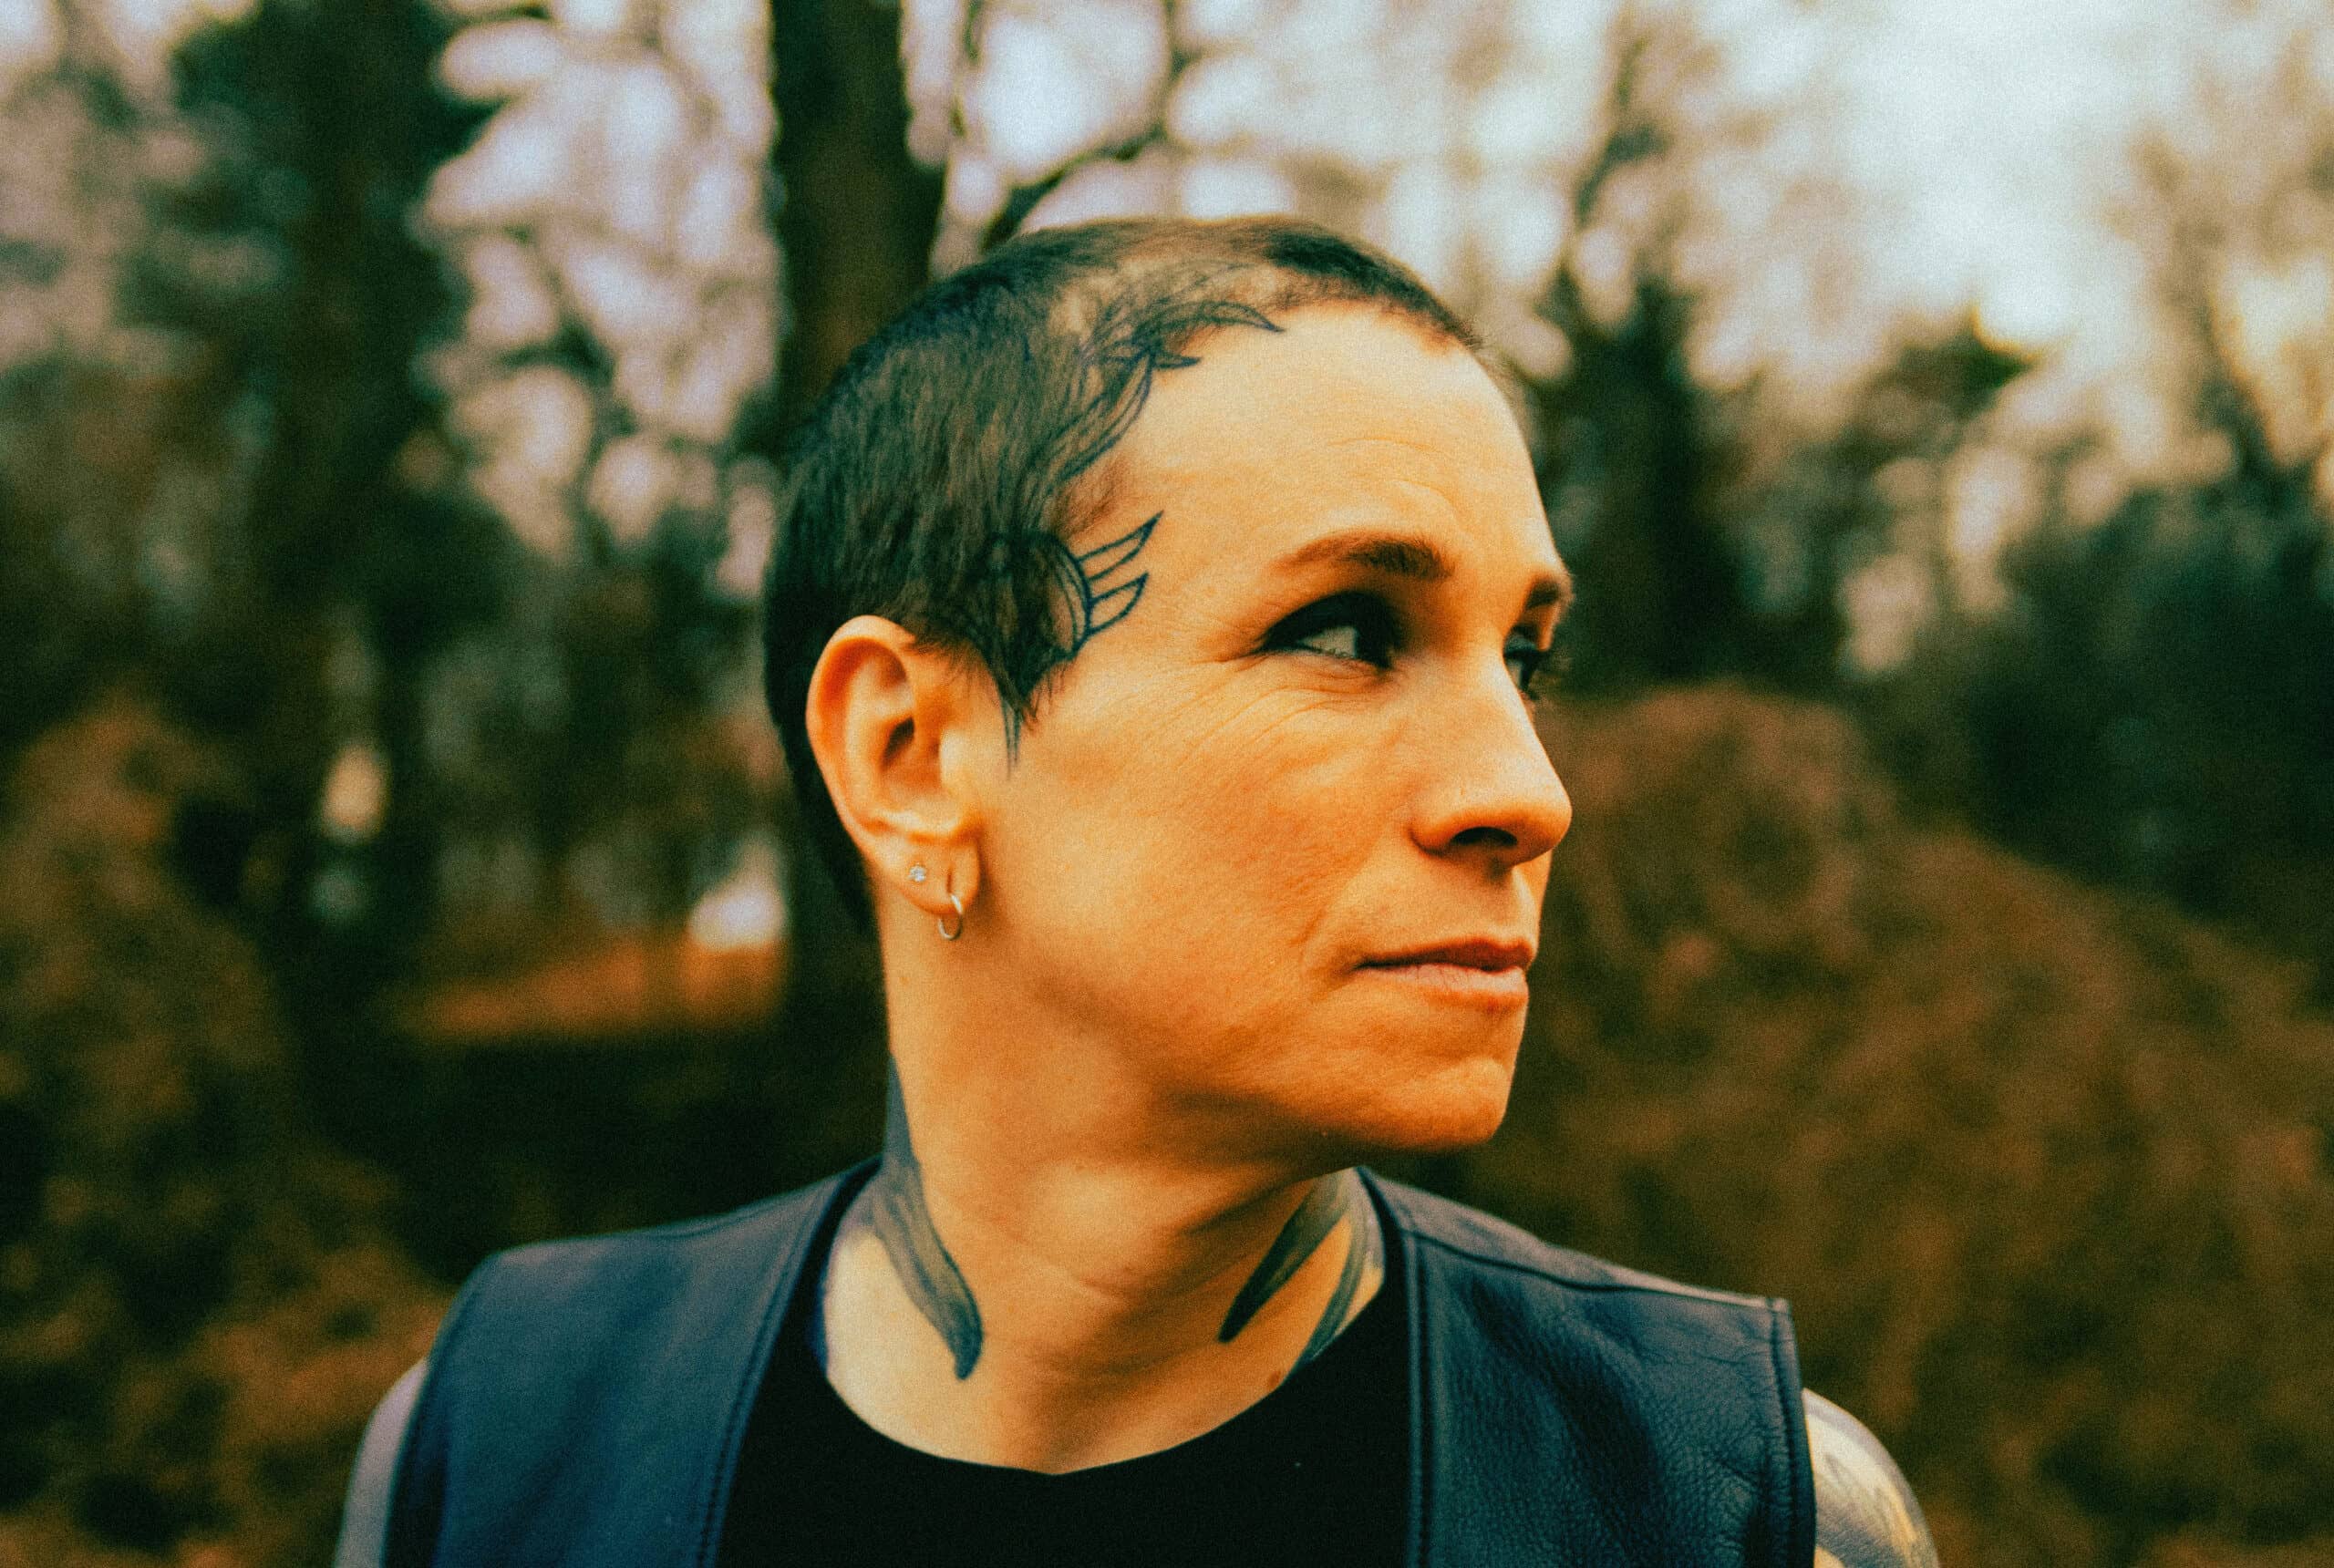 Laura Jane Grace of Against Me! on album, Naples, being